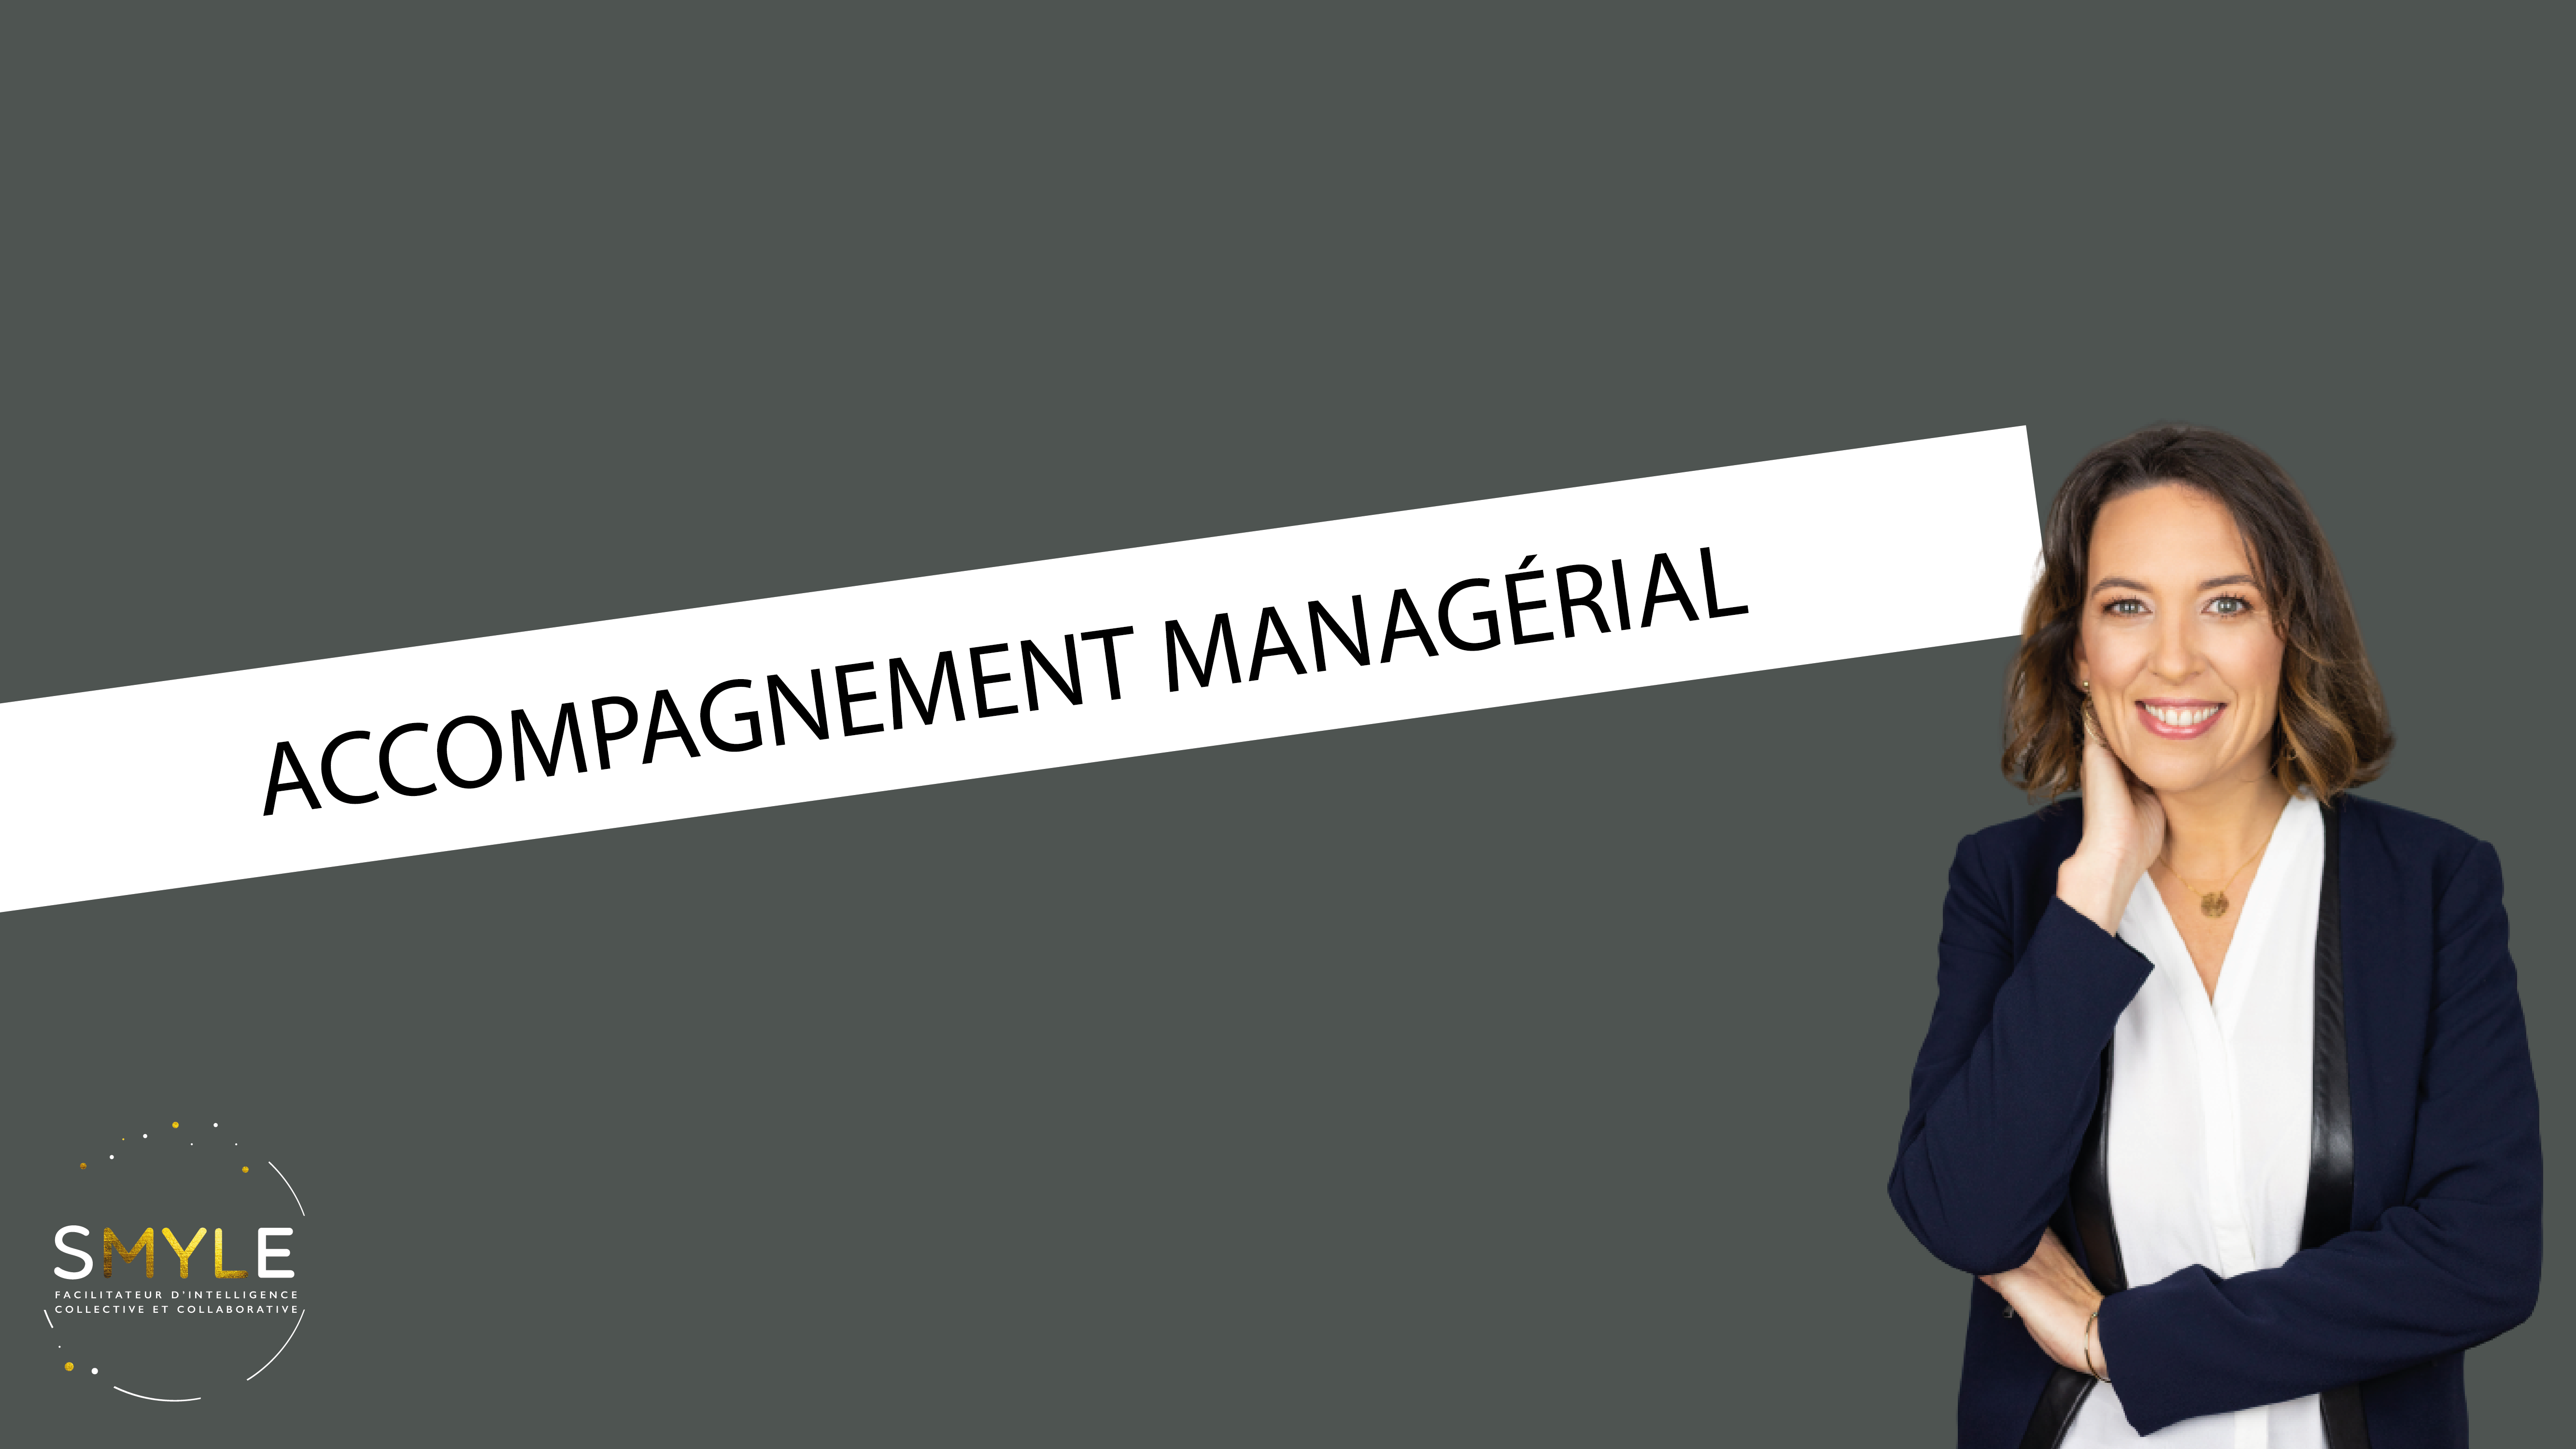 Accompagnement managérial